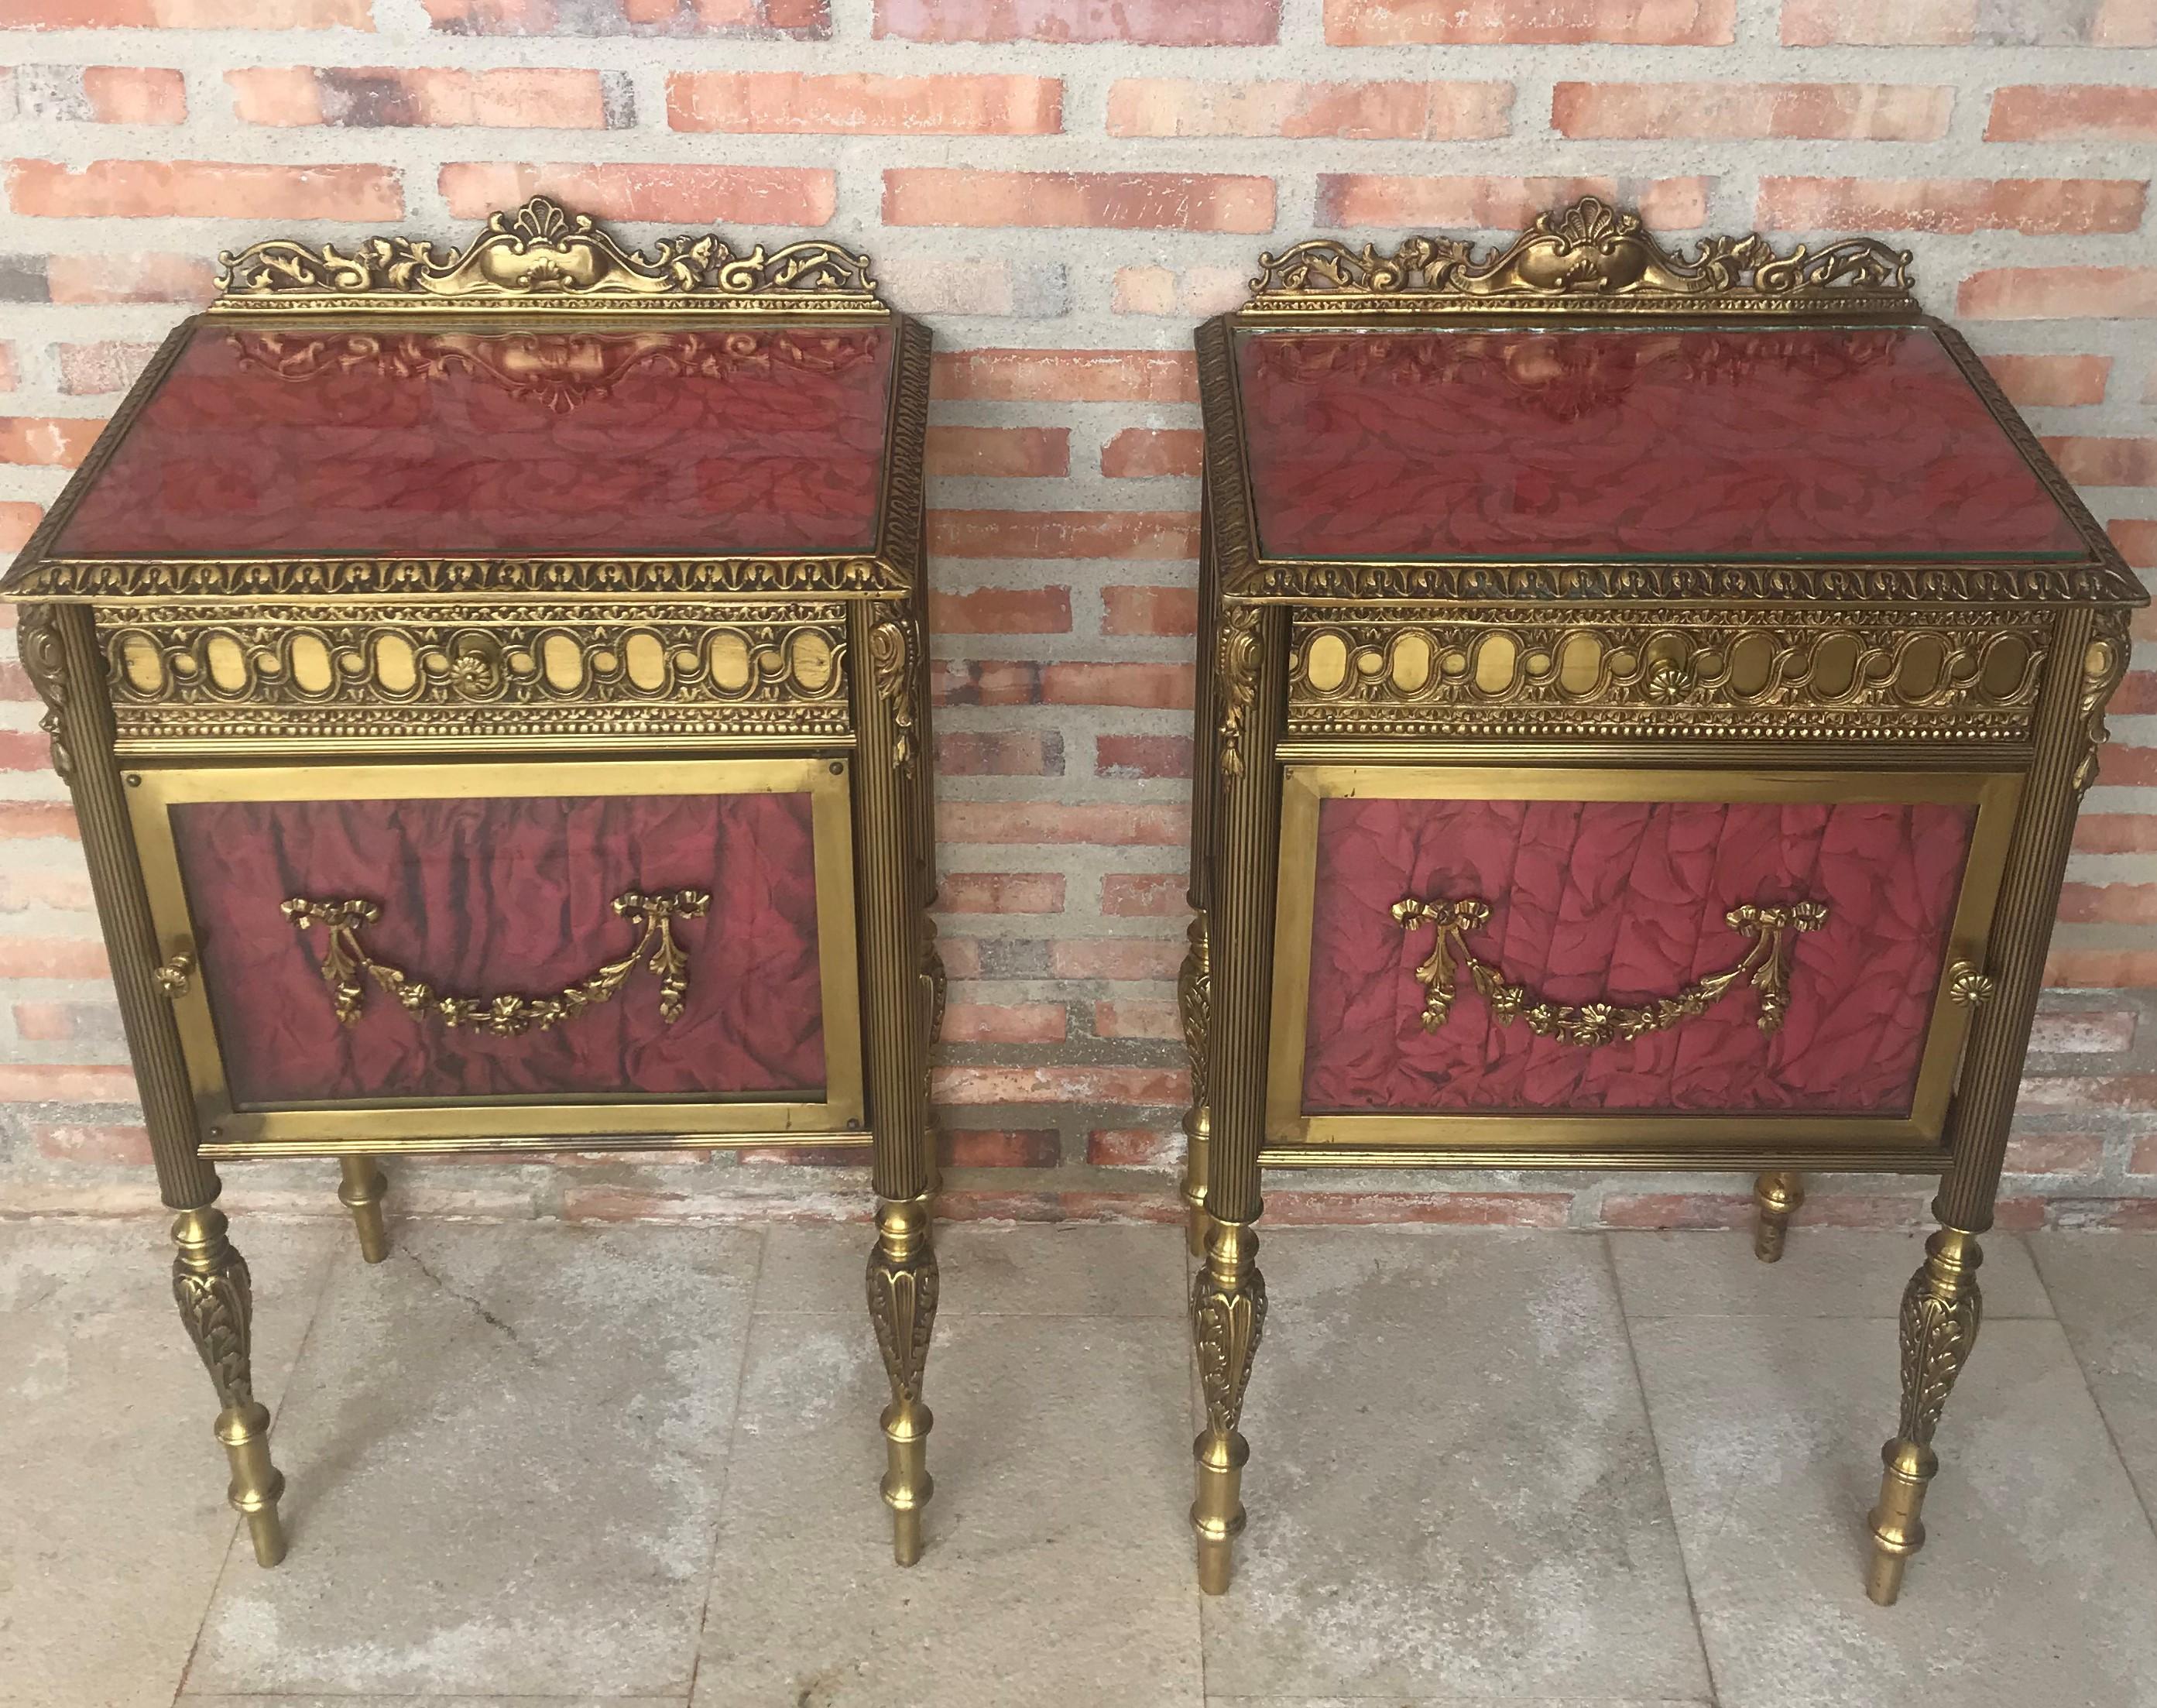 19th century pair of bronze nightstands with glass door and drawers.

This early antique Louis XVI style bronze or glass vitrine cabinet or nightstand is simply stunning and constructed of the finest quality. The bronze mounts of fine form with a